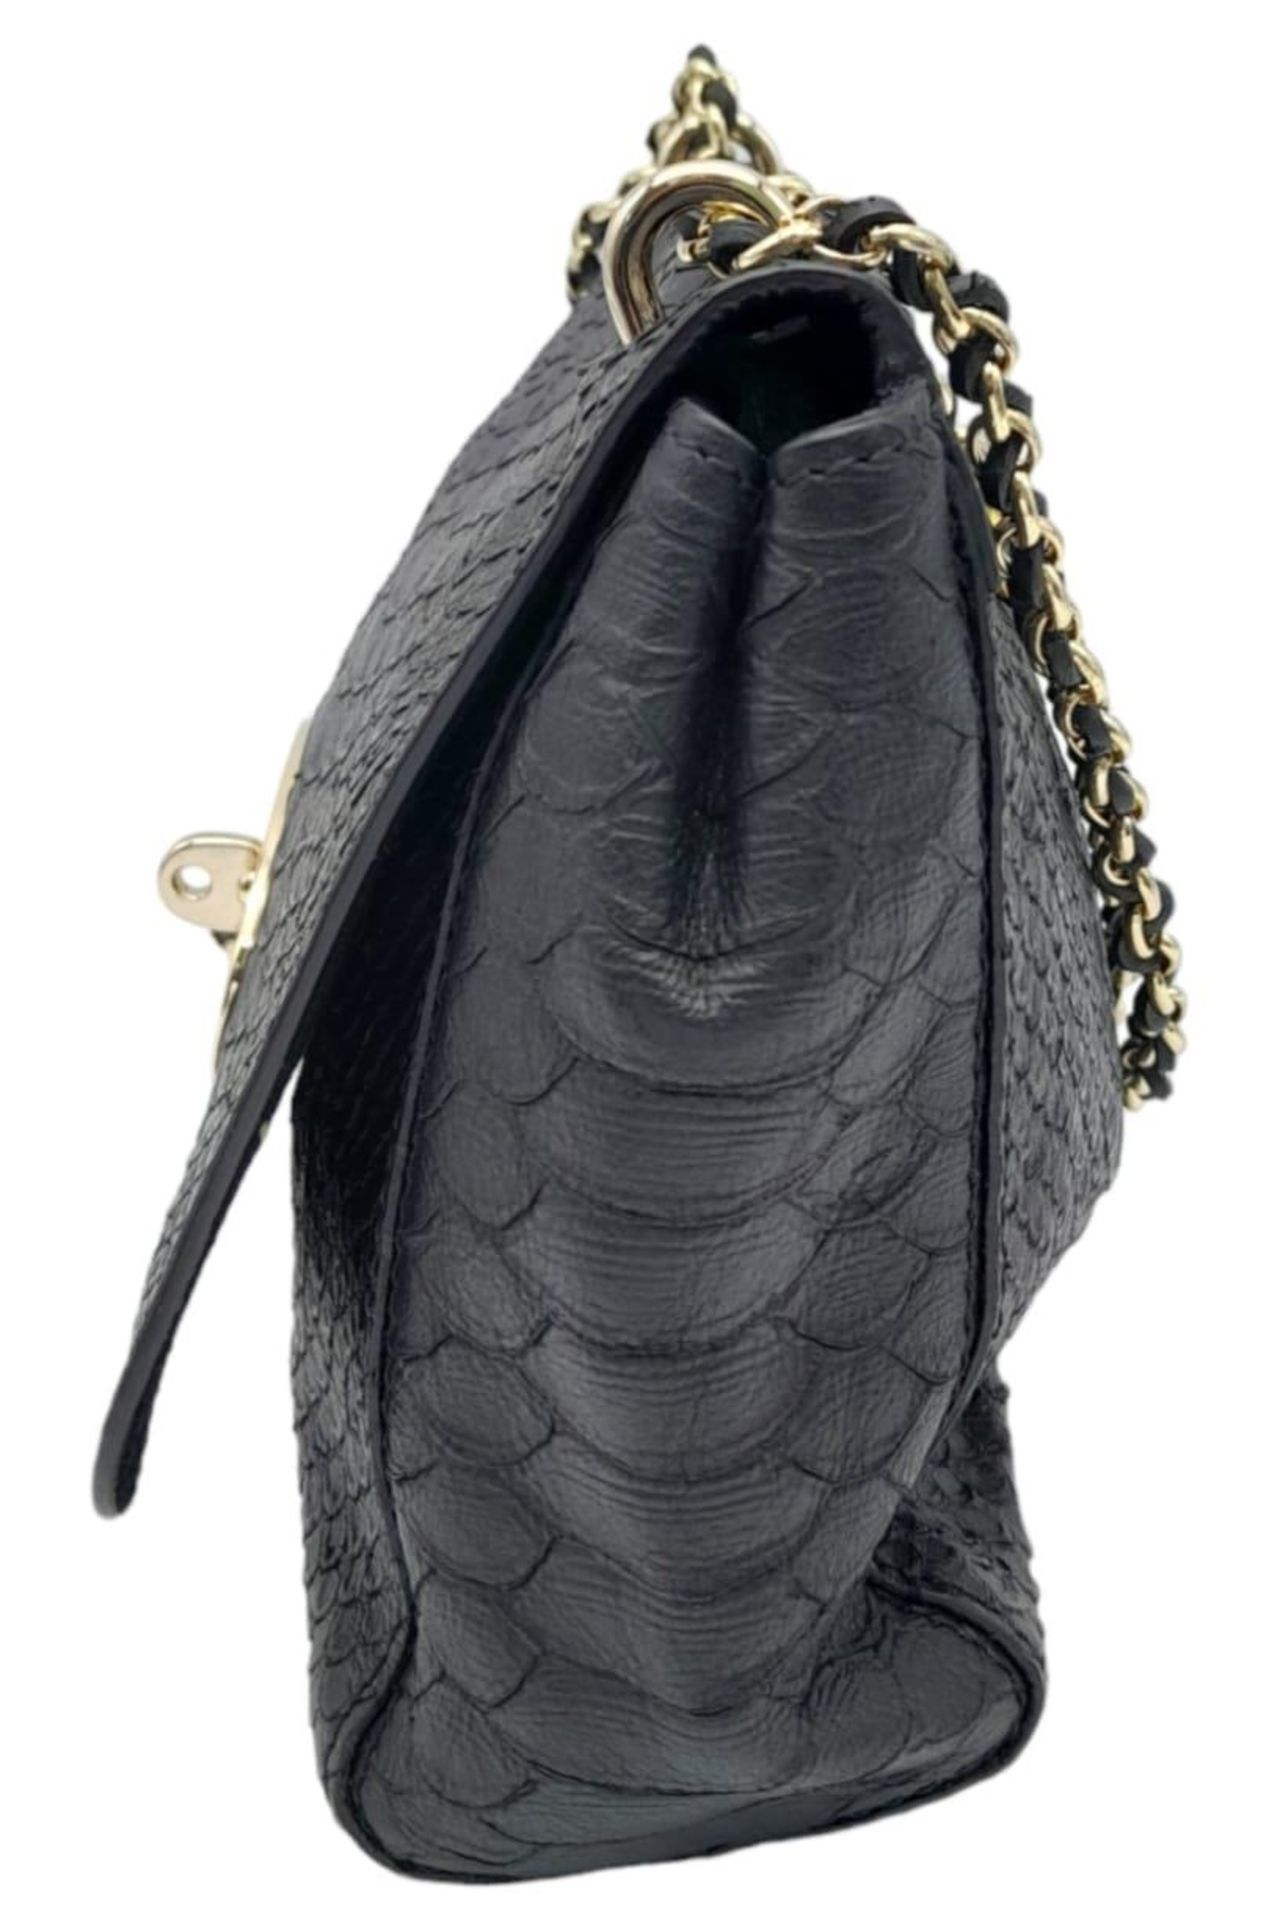 A Mulberry Black Cecily Shoulder Bag. Snakeskin exterior with gold-toned hardware, chain and leather - Image 3 of 8